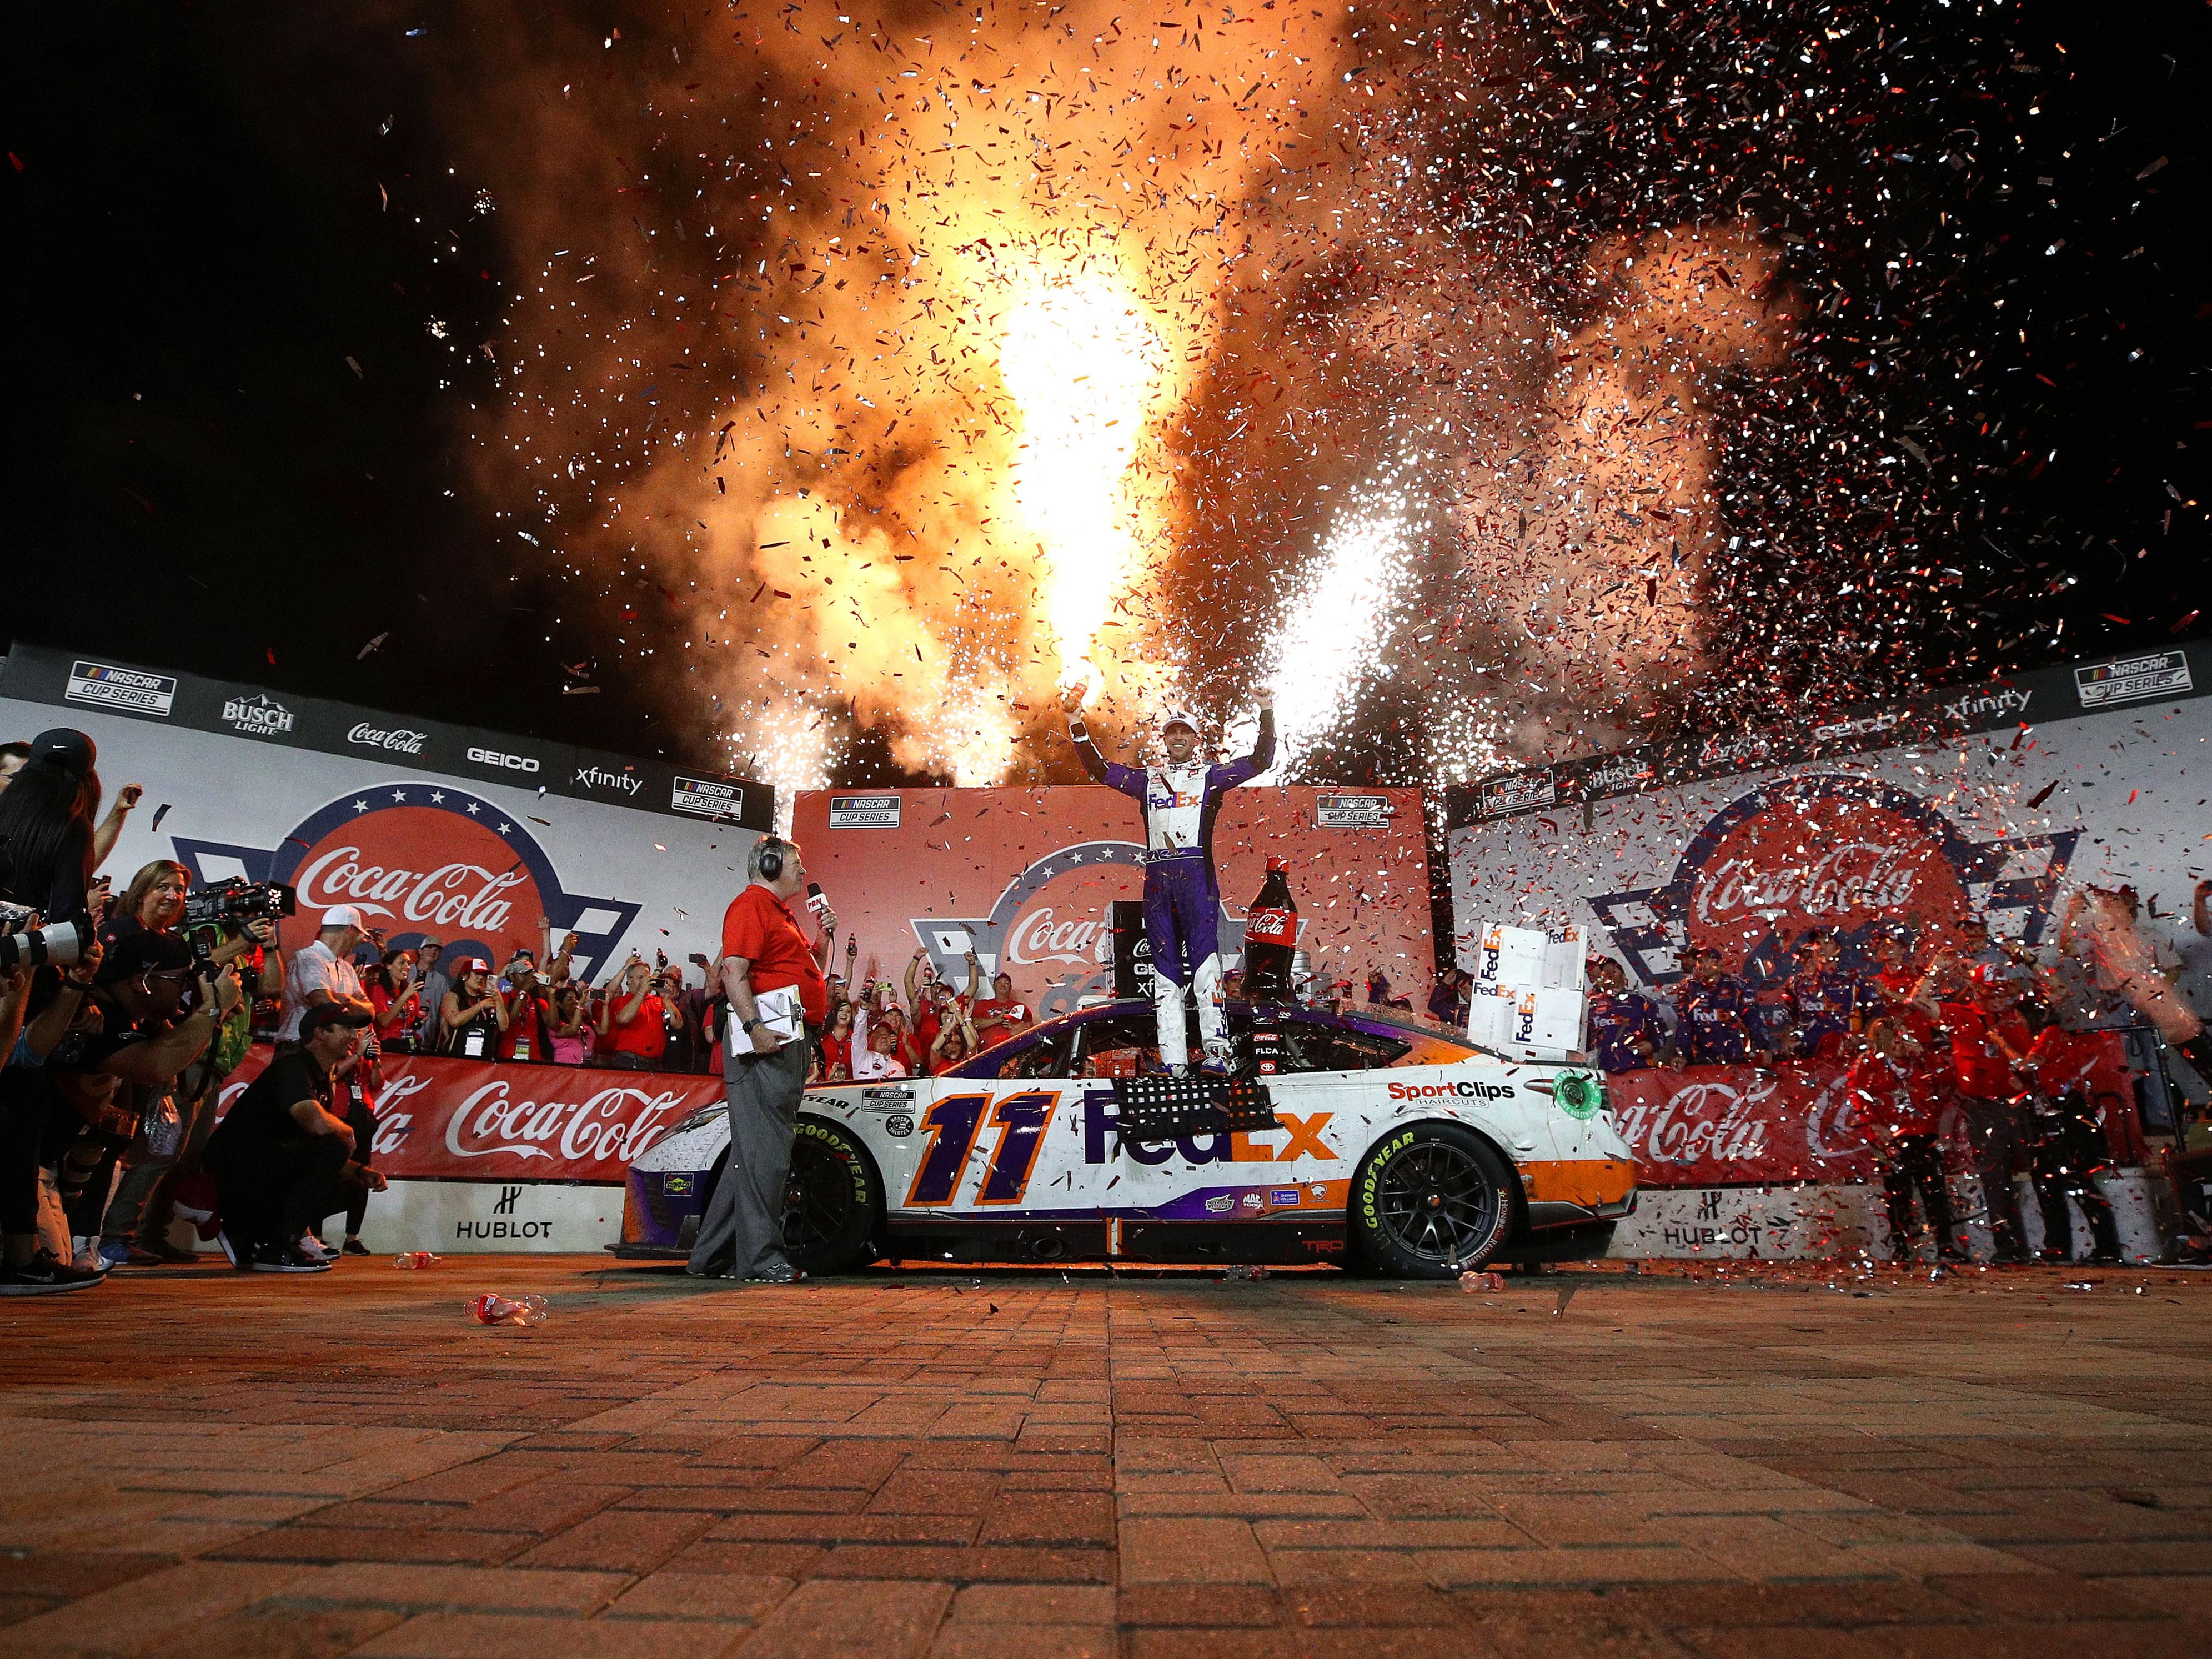 Denny Hamlin celebrates in Victory Lane after winning the 2022 NASCAR Cup Series Coca-Cola 600 at Charlotte Motor Speedway in Concord, North Carolina. (Photo by Jared C. Tilton/Getty Images)